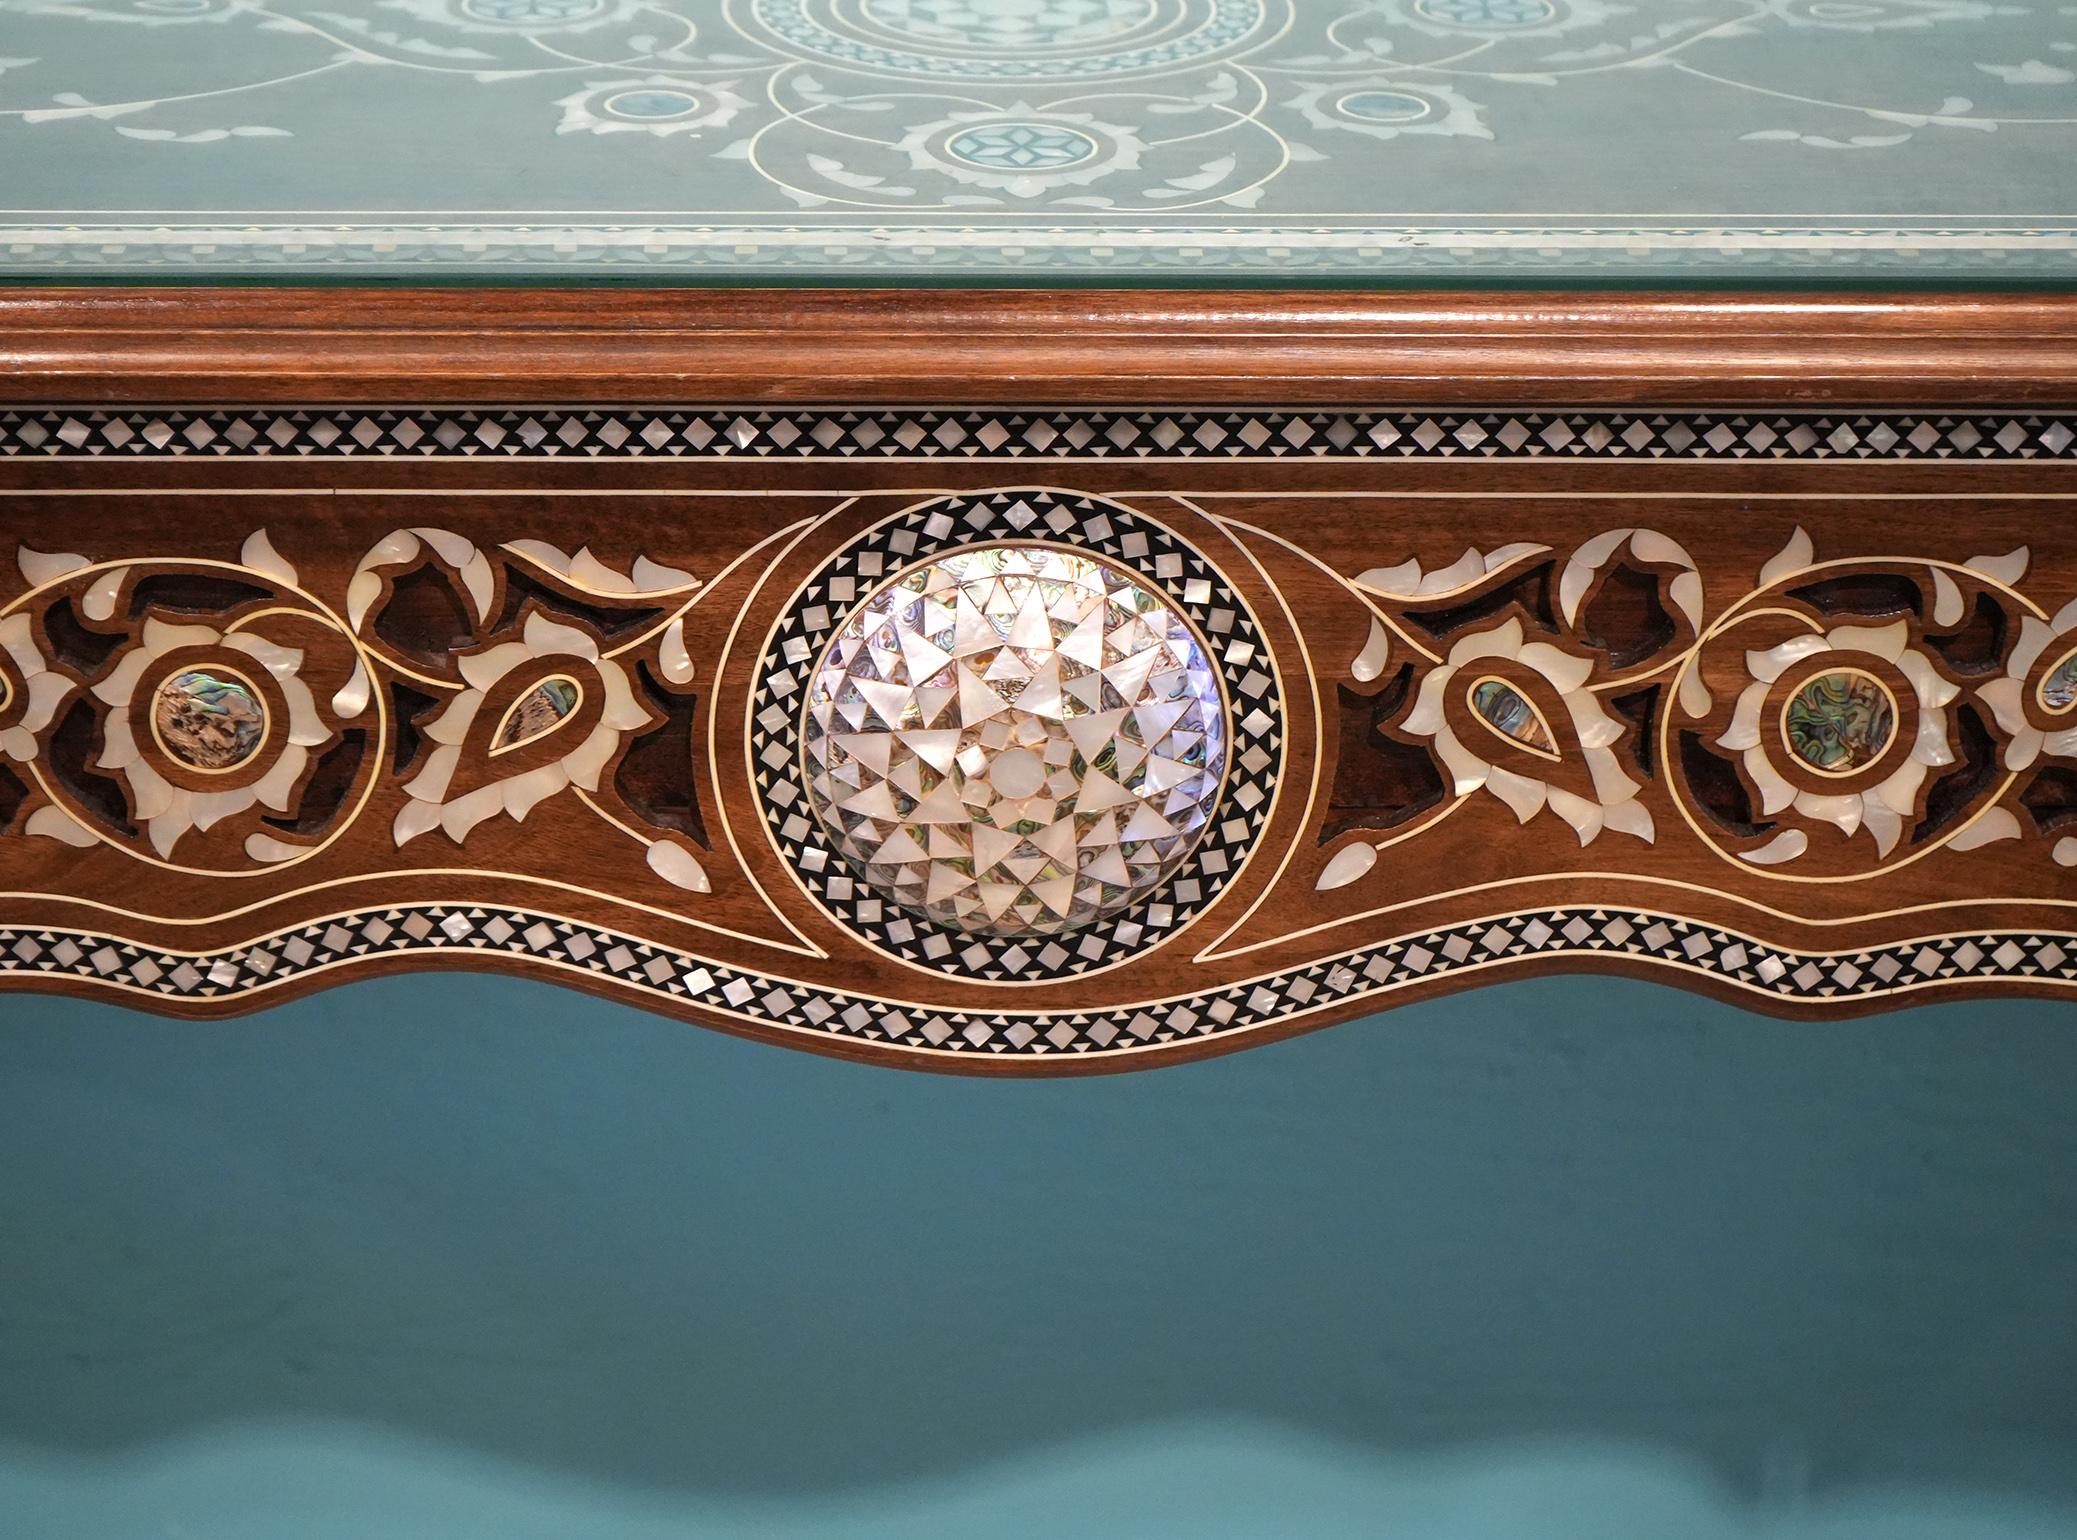 This elaborately inlaid Middle Eastern console table features a protective glass top above a stunning inlaid top with arabesques leaf work and rosettes. The tree drawer fronts center a raised convex rosette and continuous decoration in the shape of